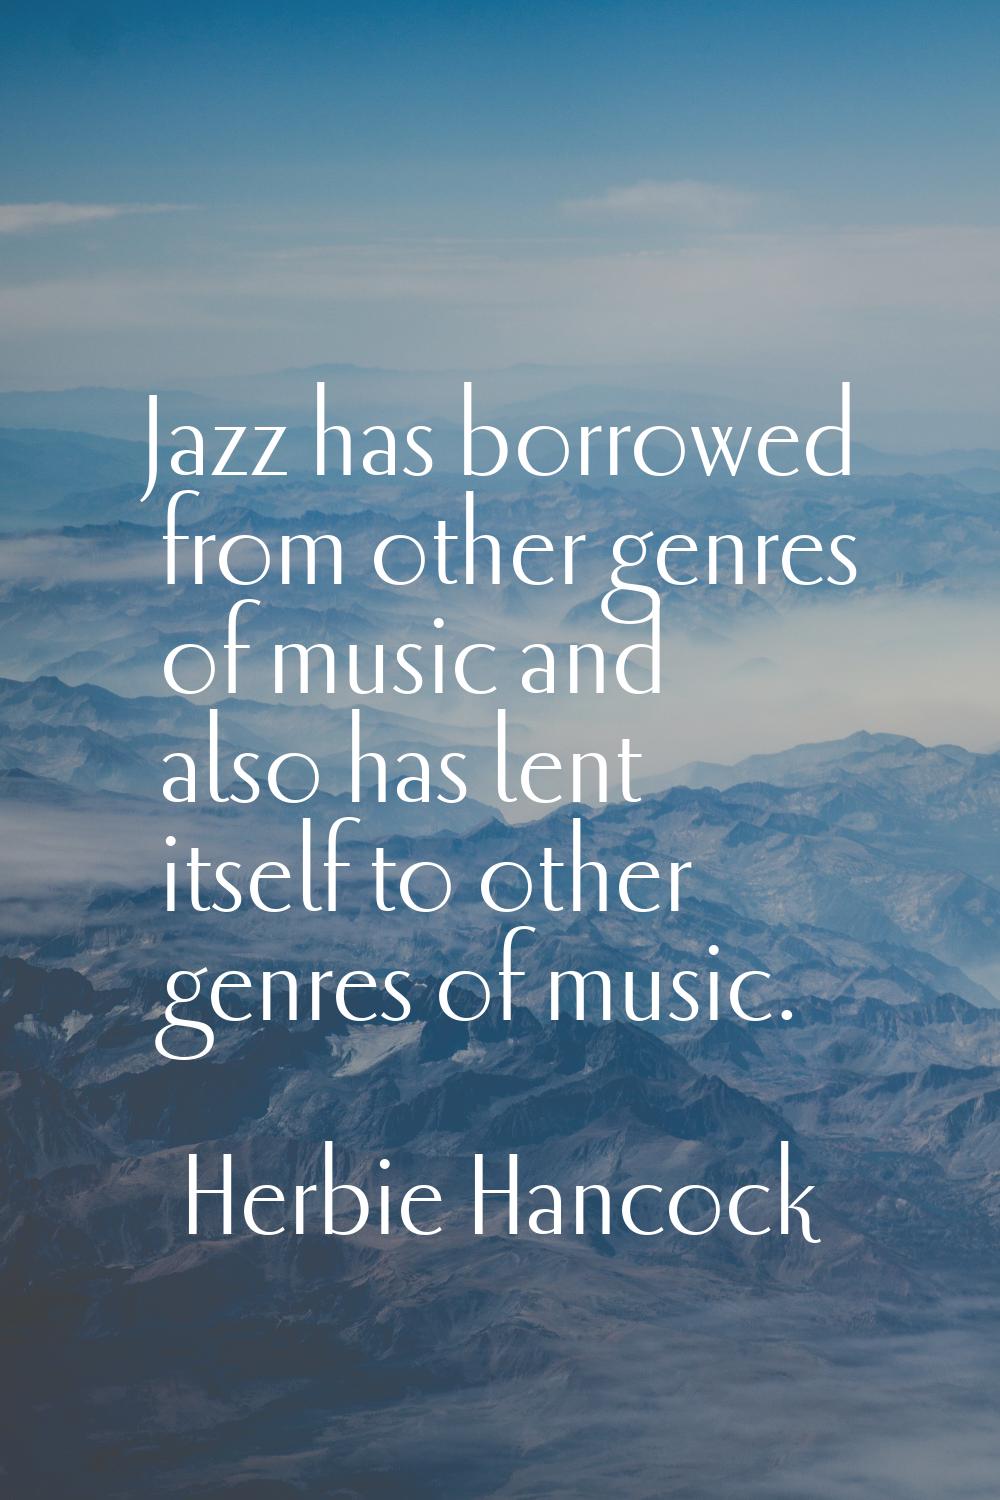 Jazz has borrowed from other genres of music and also has lent itself to other genres of music.